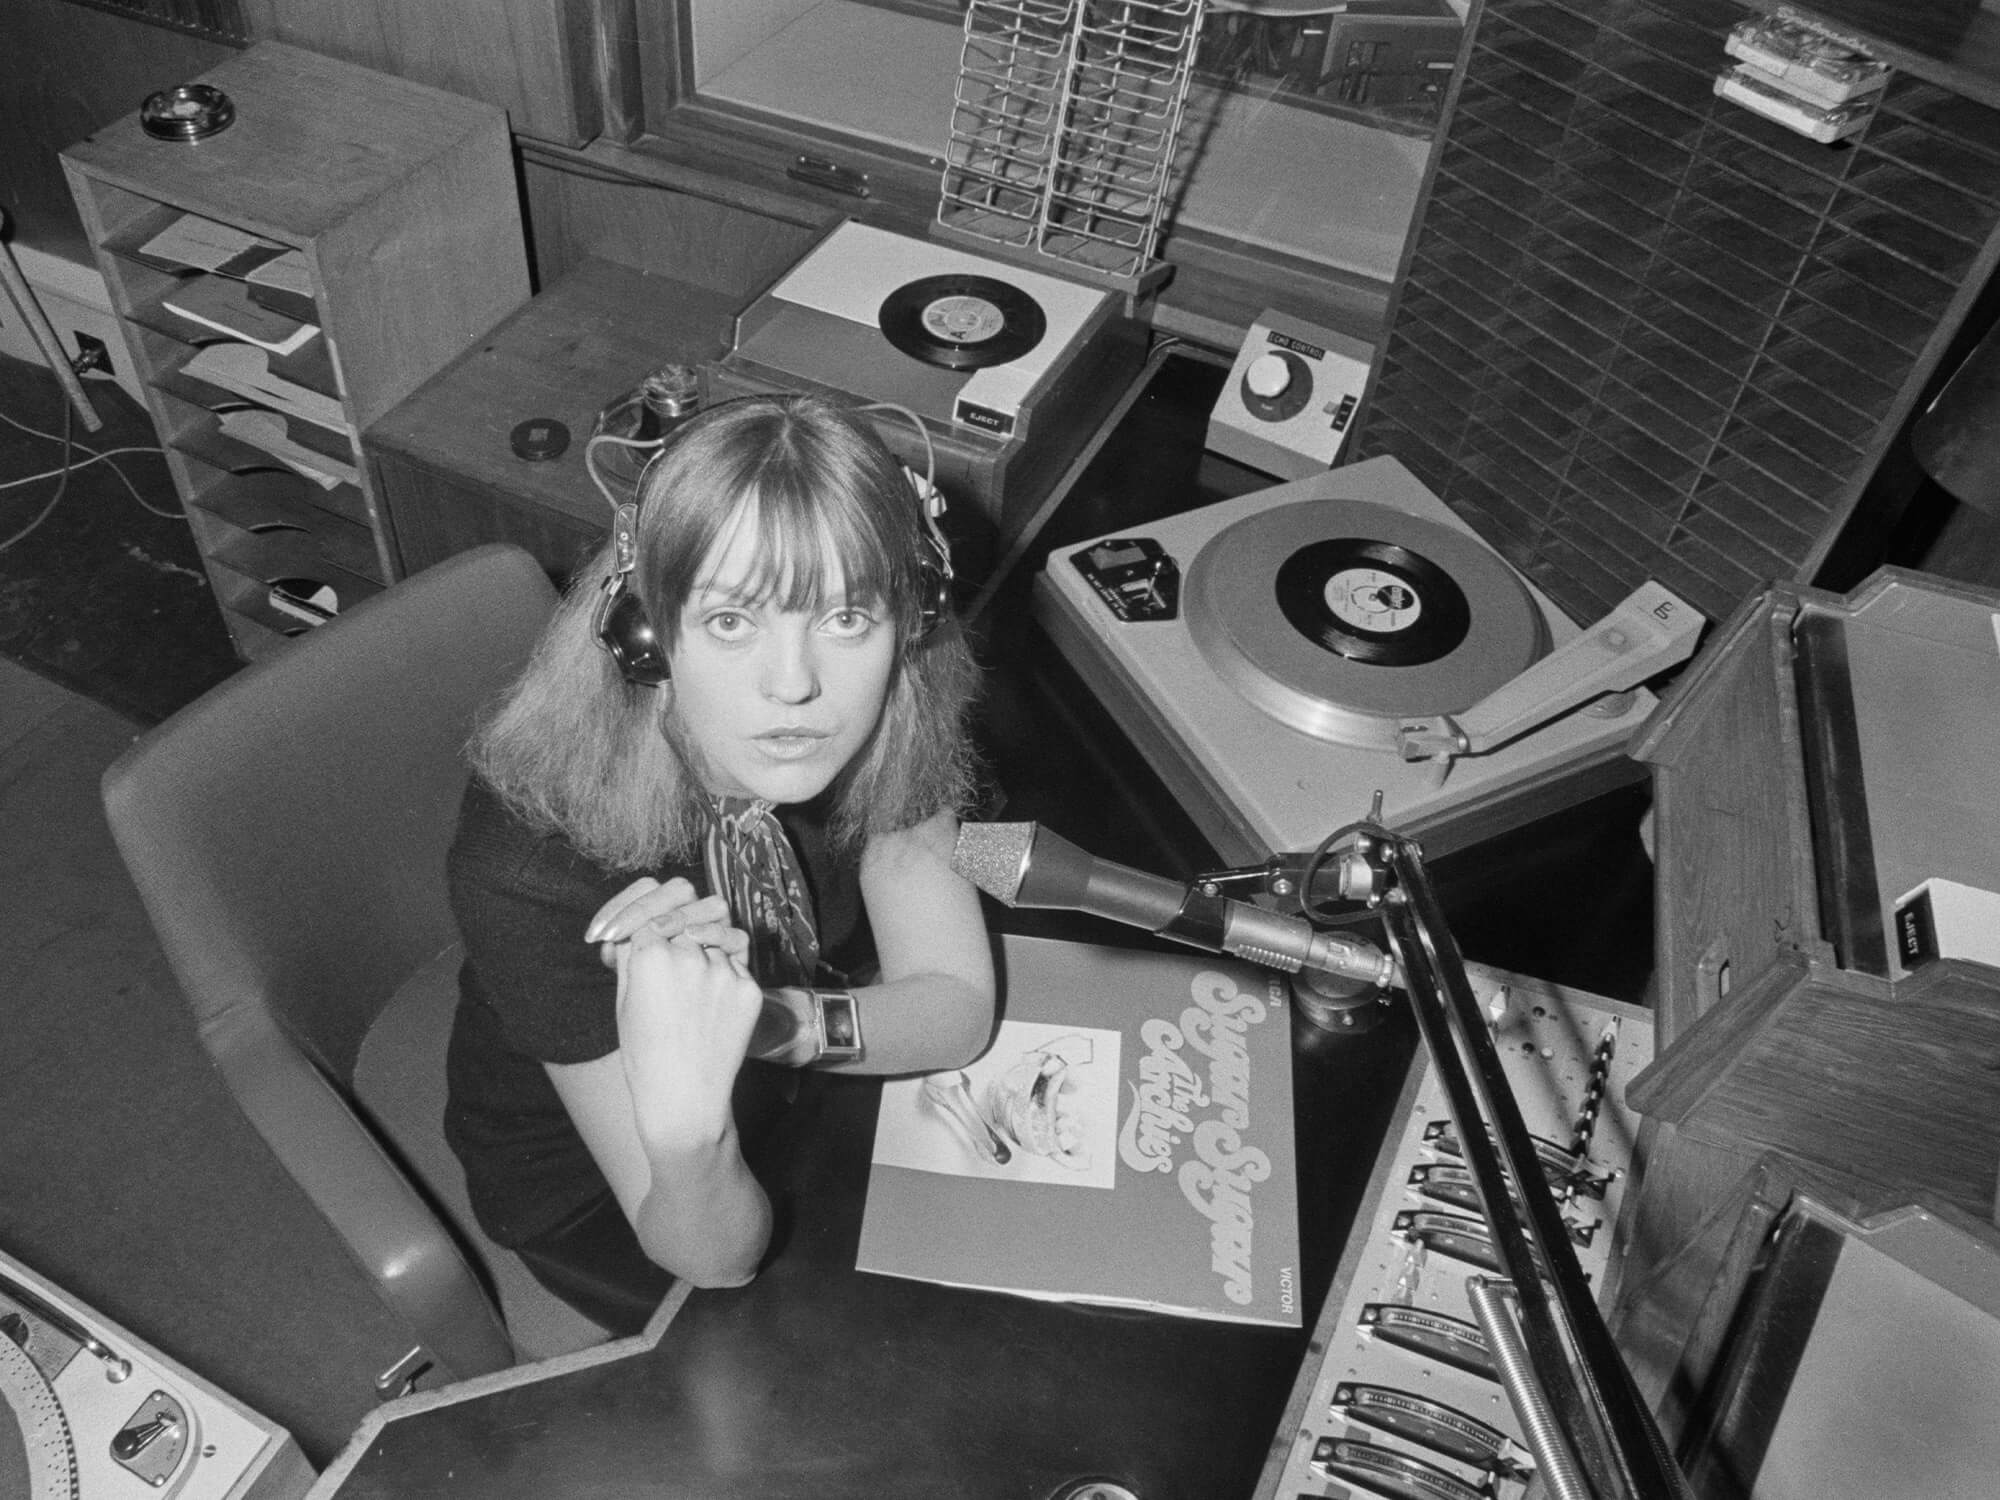 A black and white photo of Annie Nightingale taken in 1970. She is sitting in a radio studio with a set of headphones on. A mic is positioned on an metal arm in front of her.